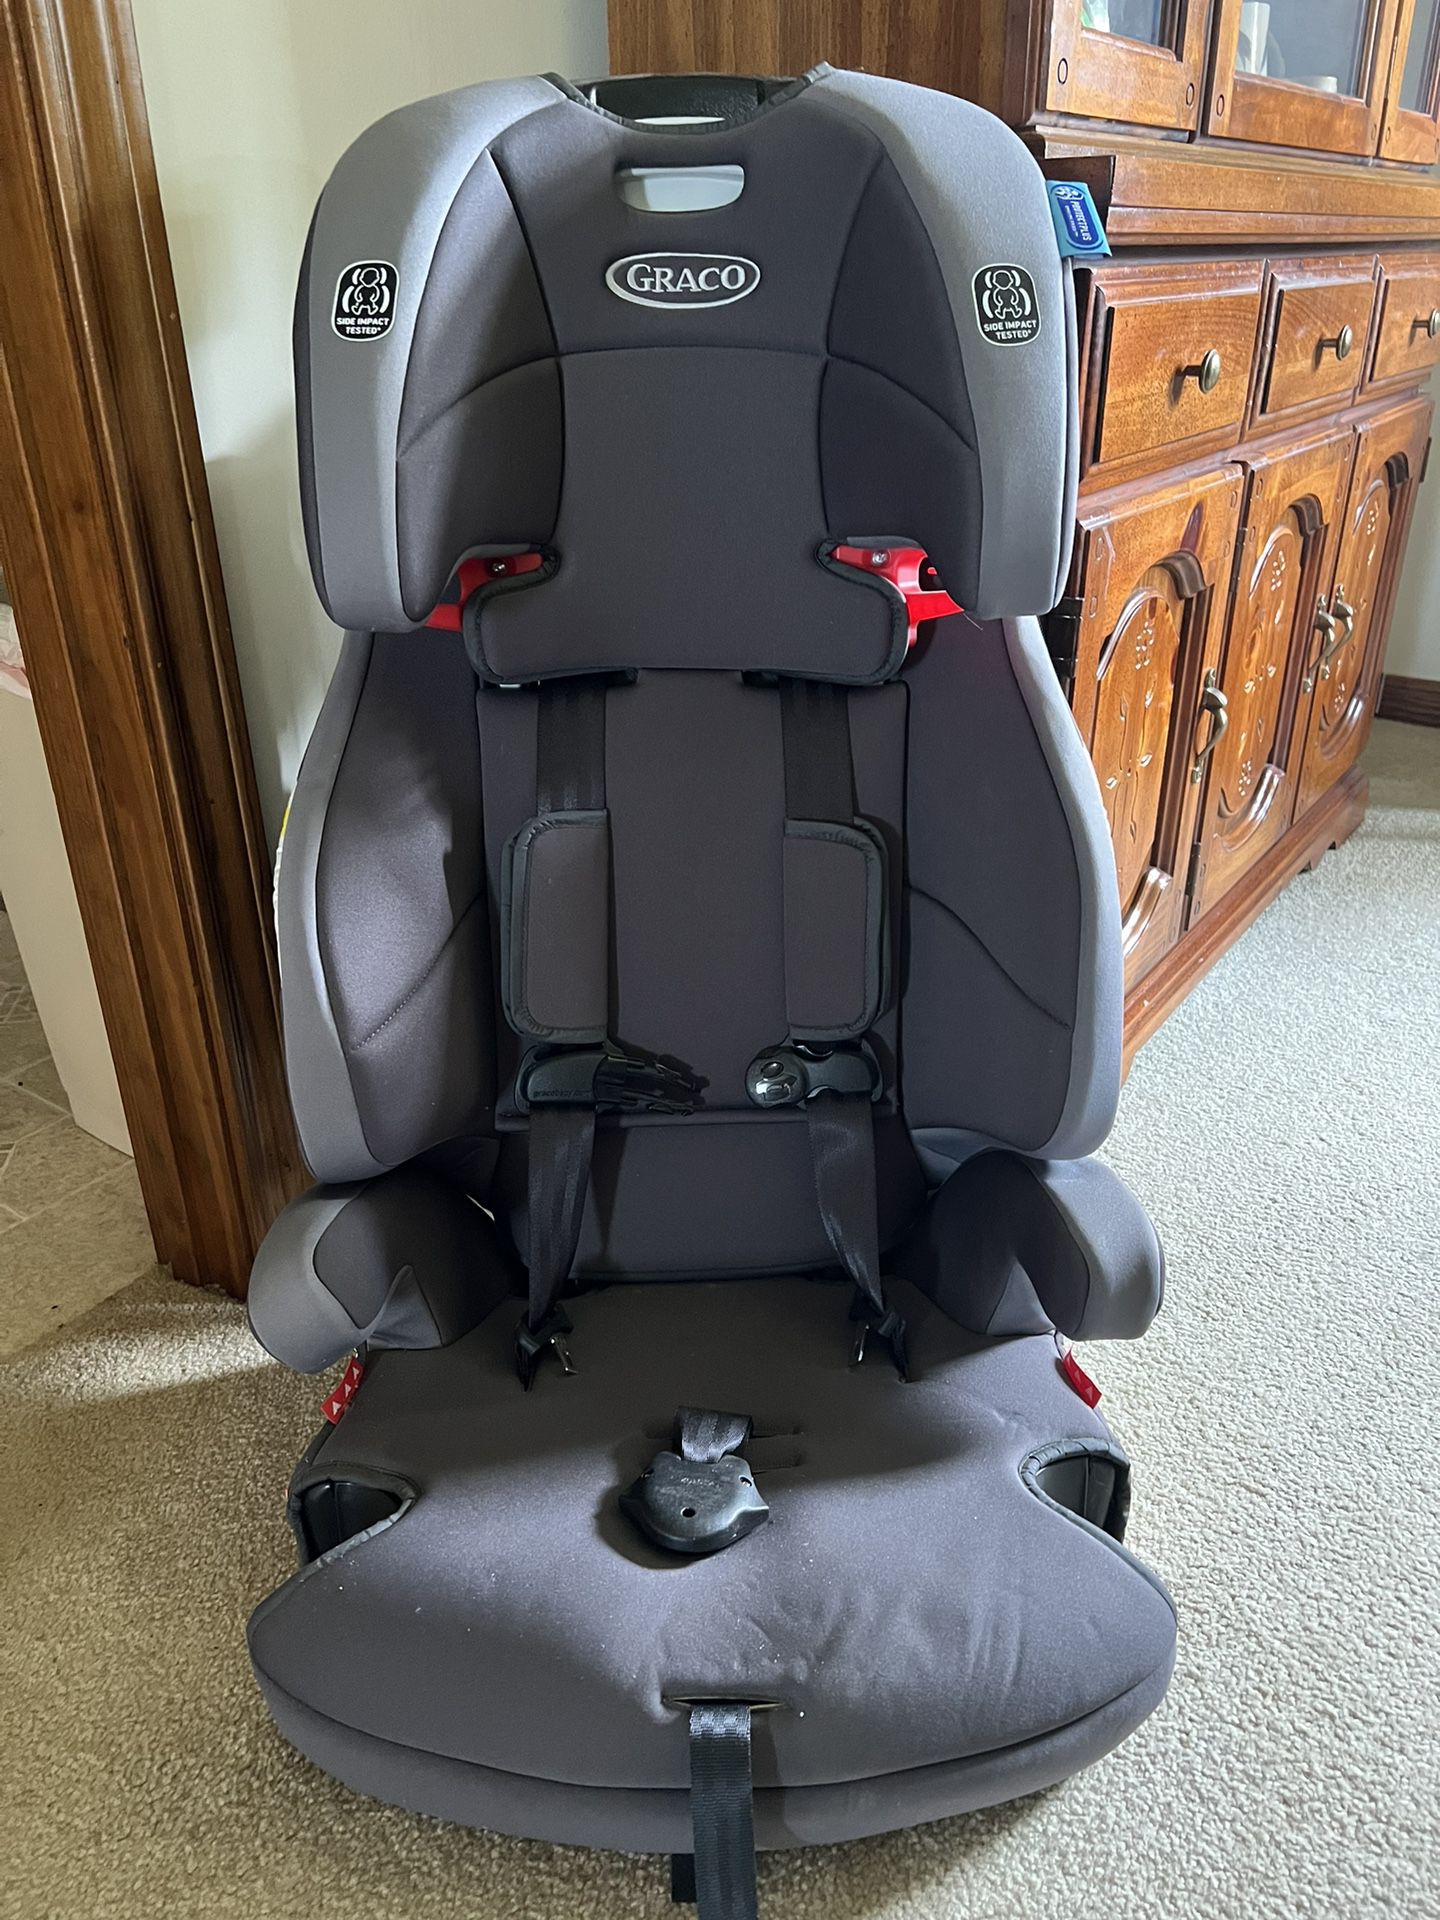 Gracie 3-in-1 Infant/Child Car seat 